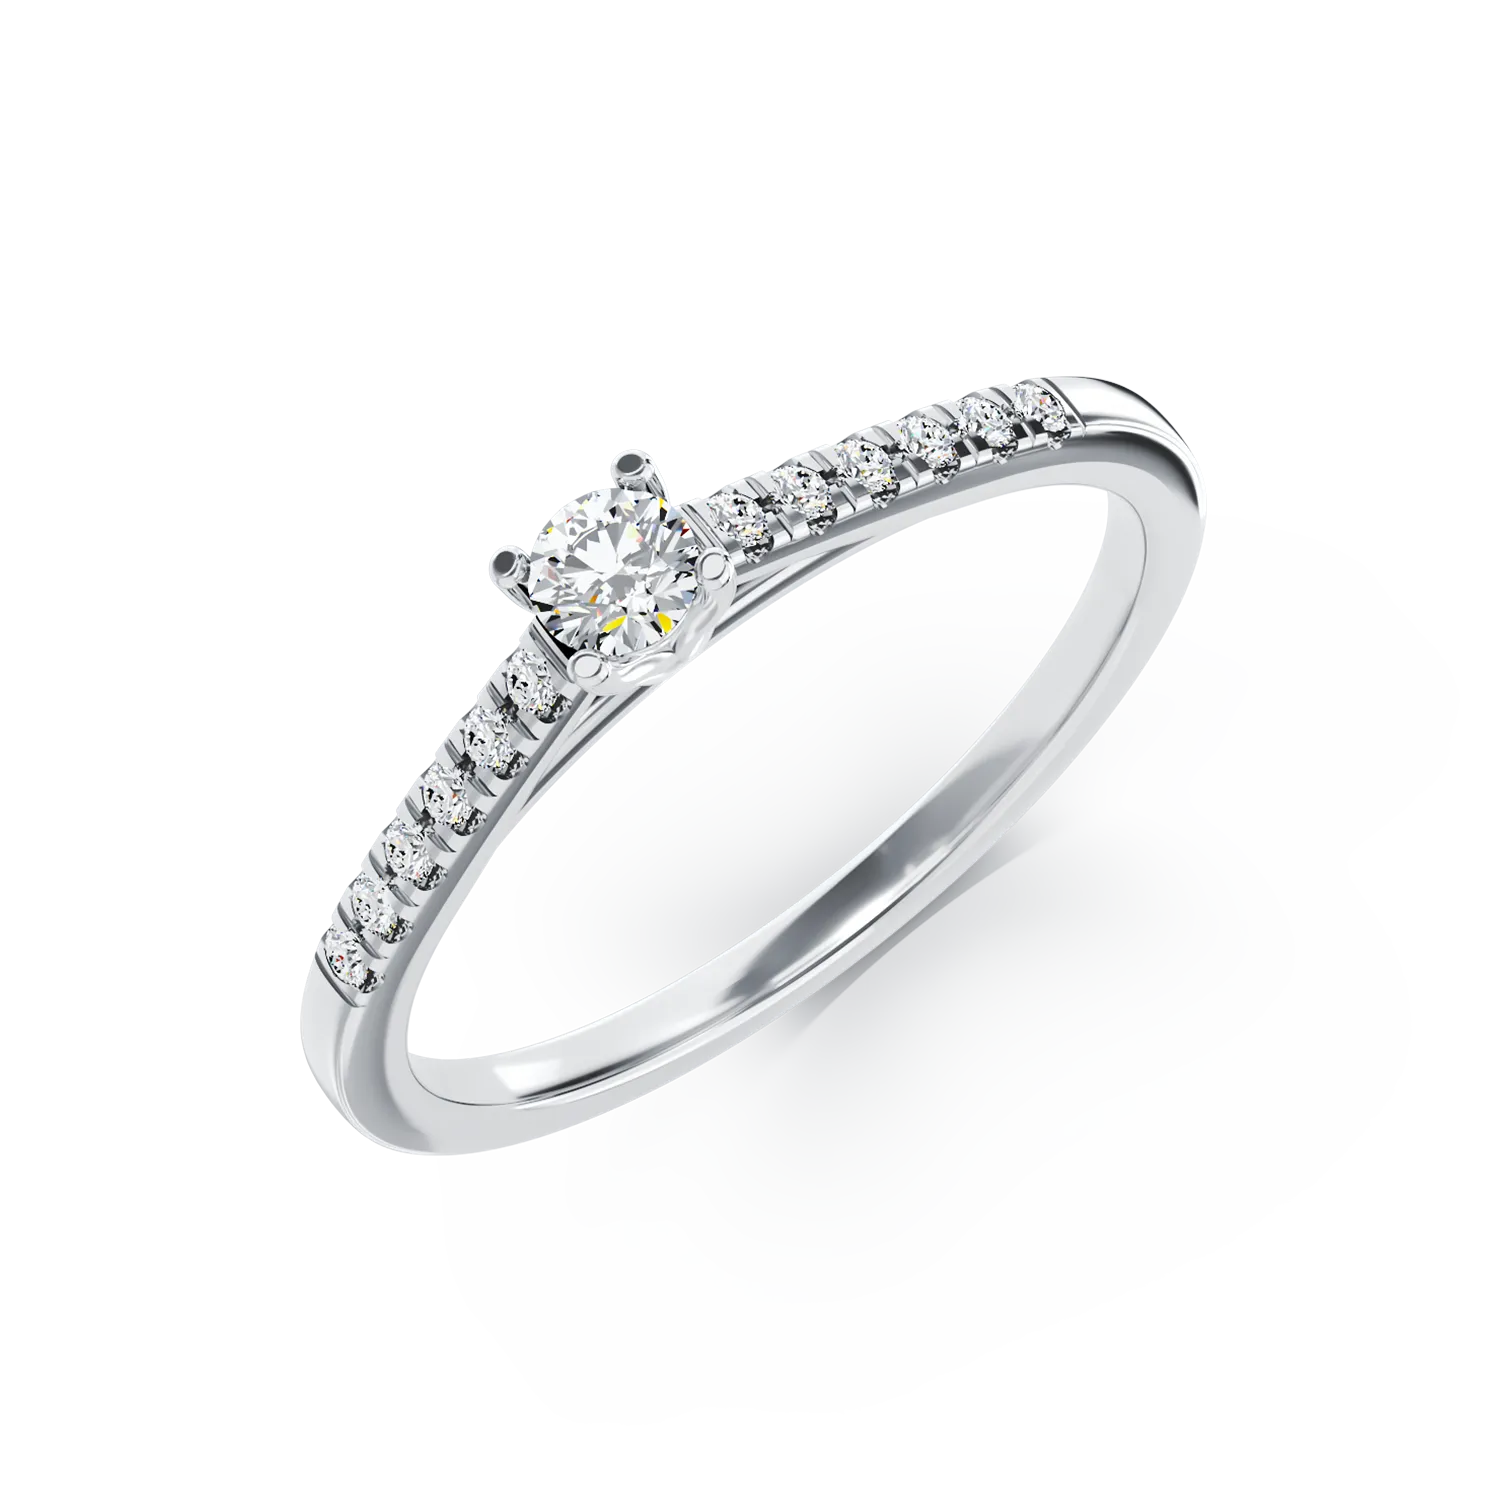 White gold engagement ring with 0.4ct diamonds